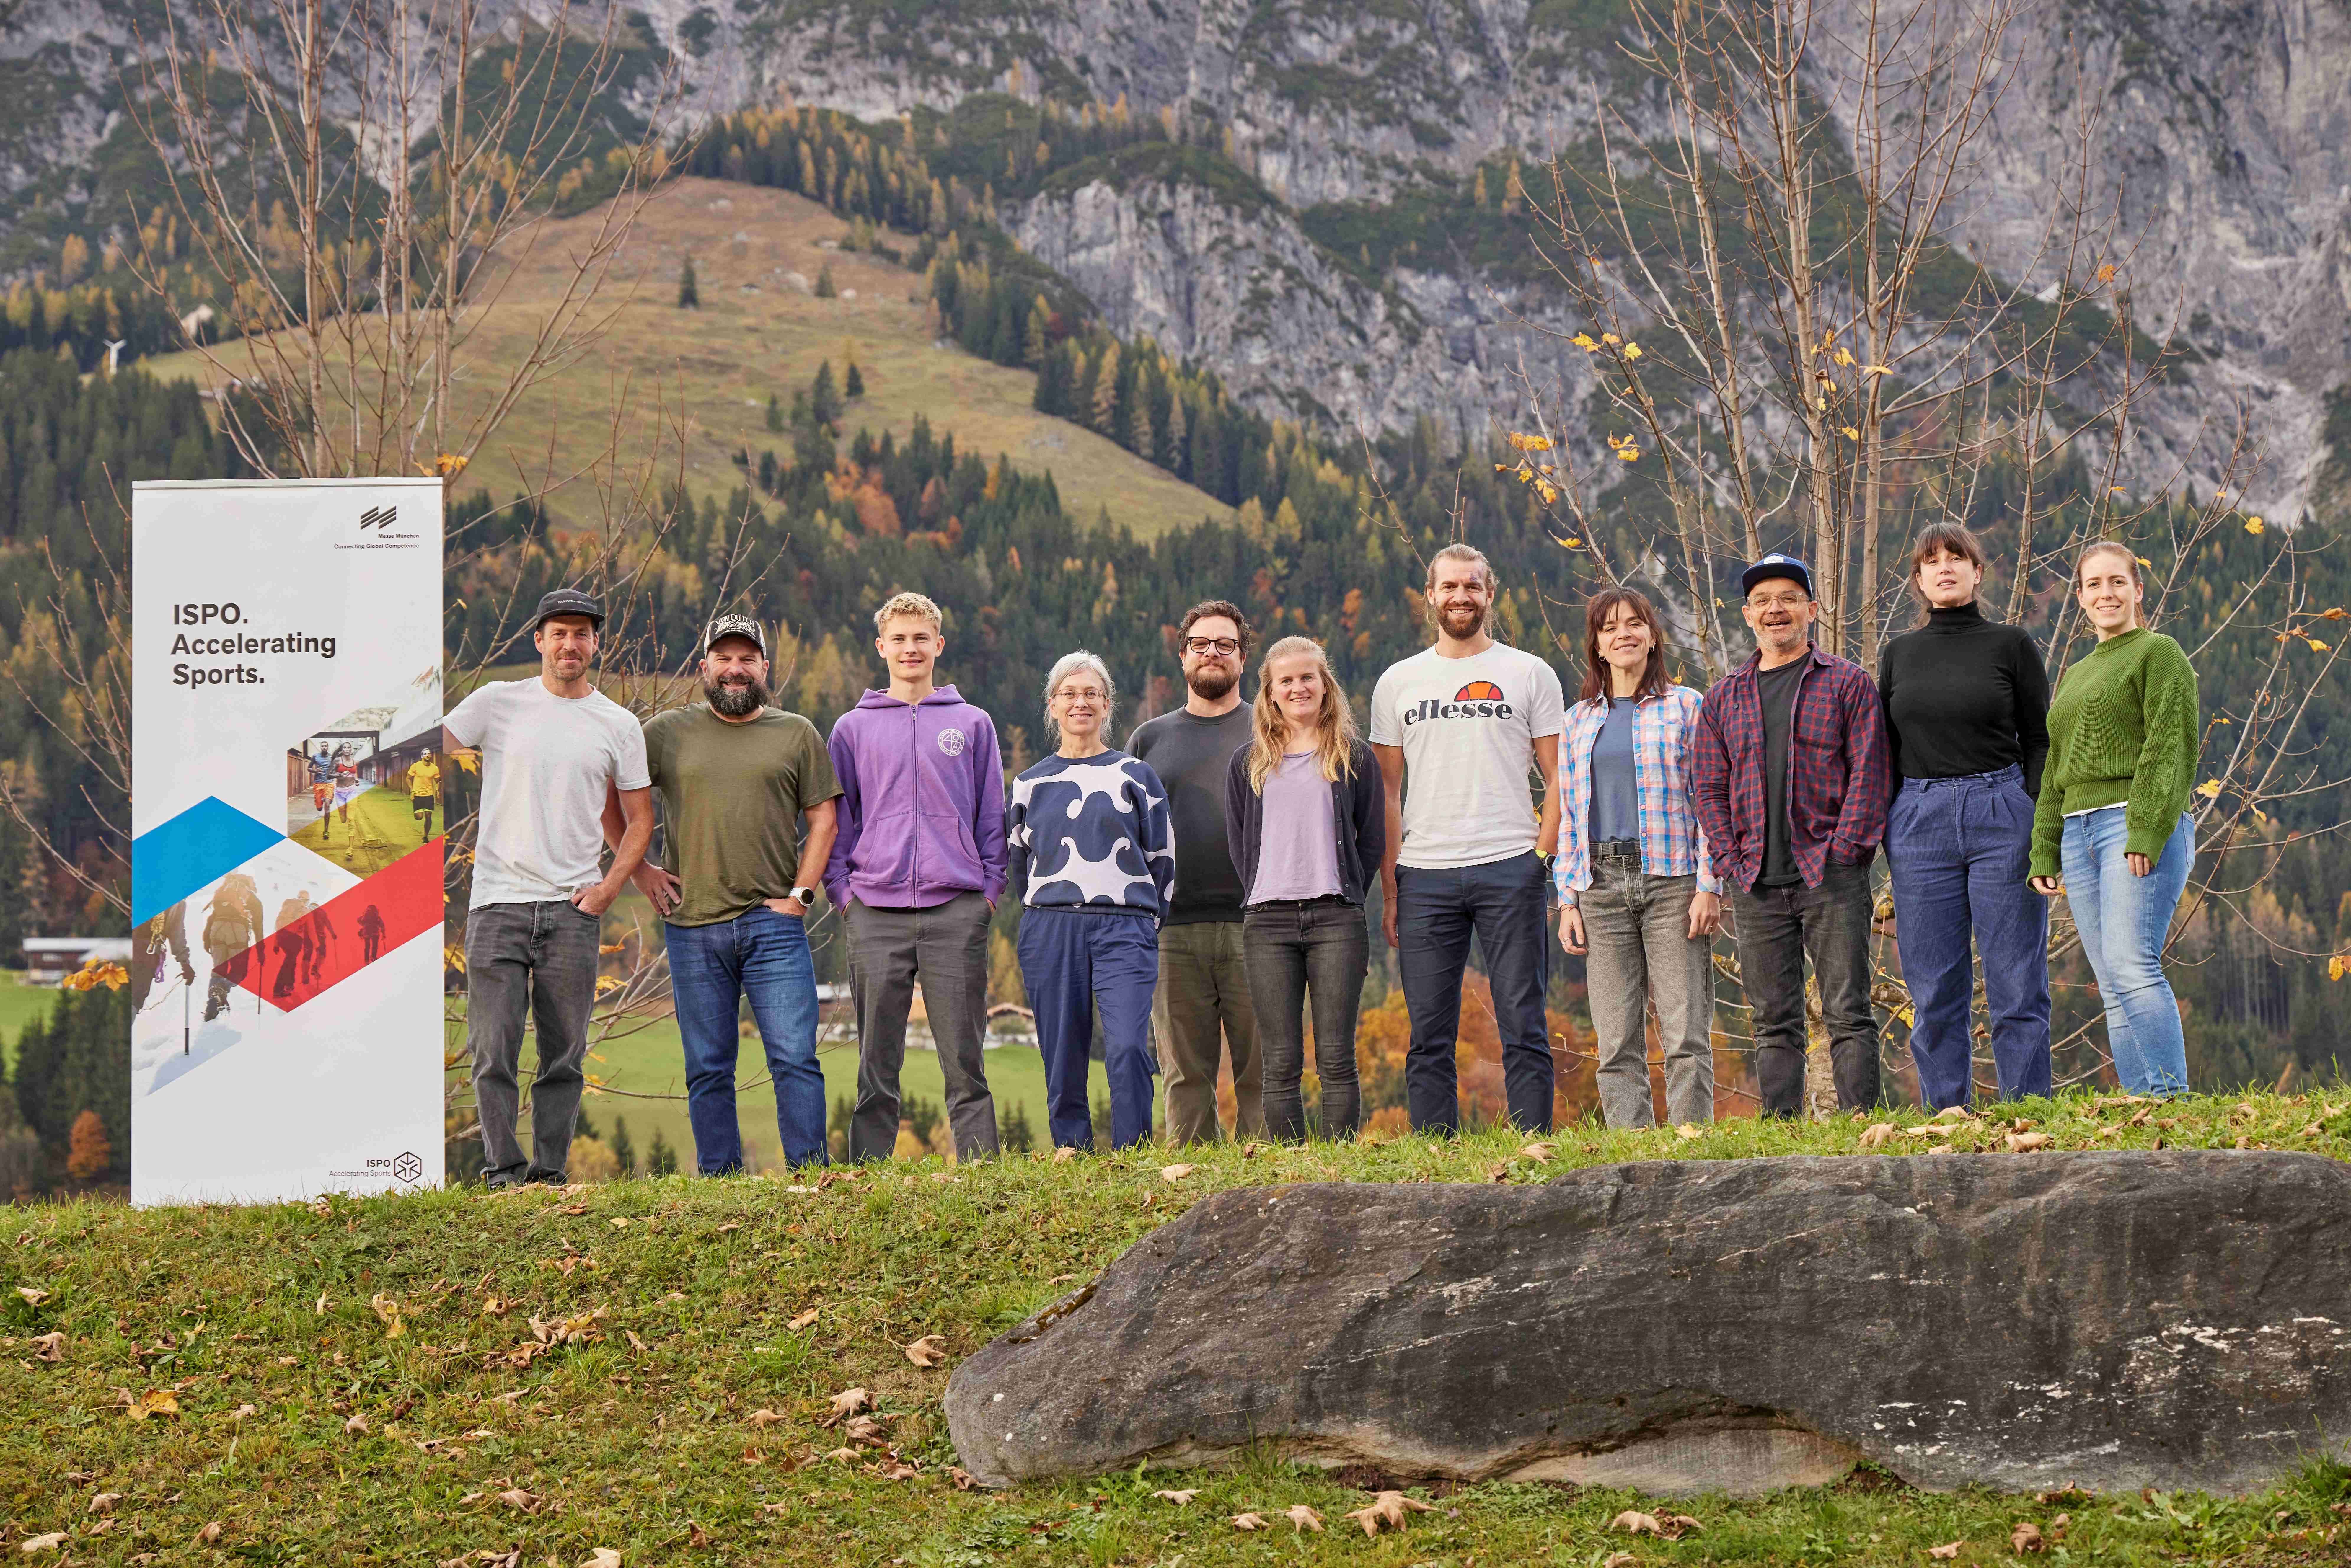 These are the winners after the fourth jury meeting of the ISPO